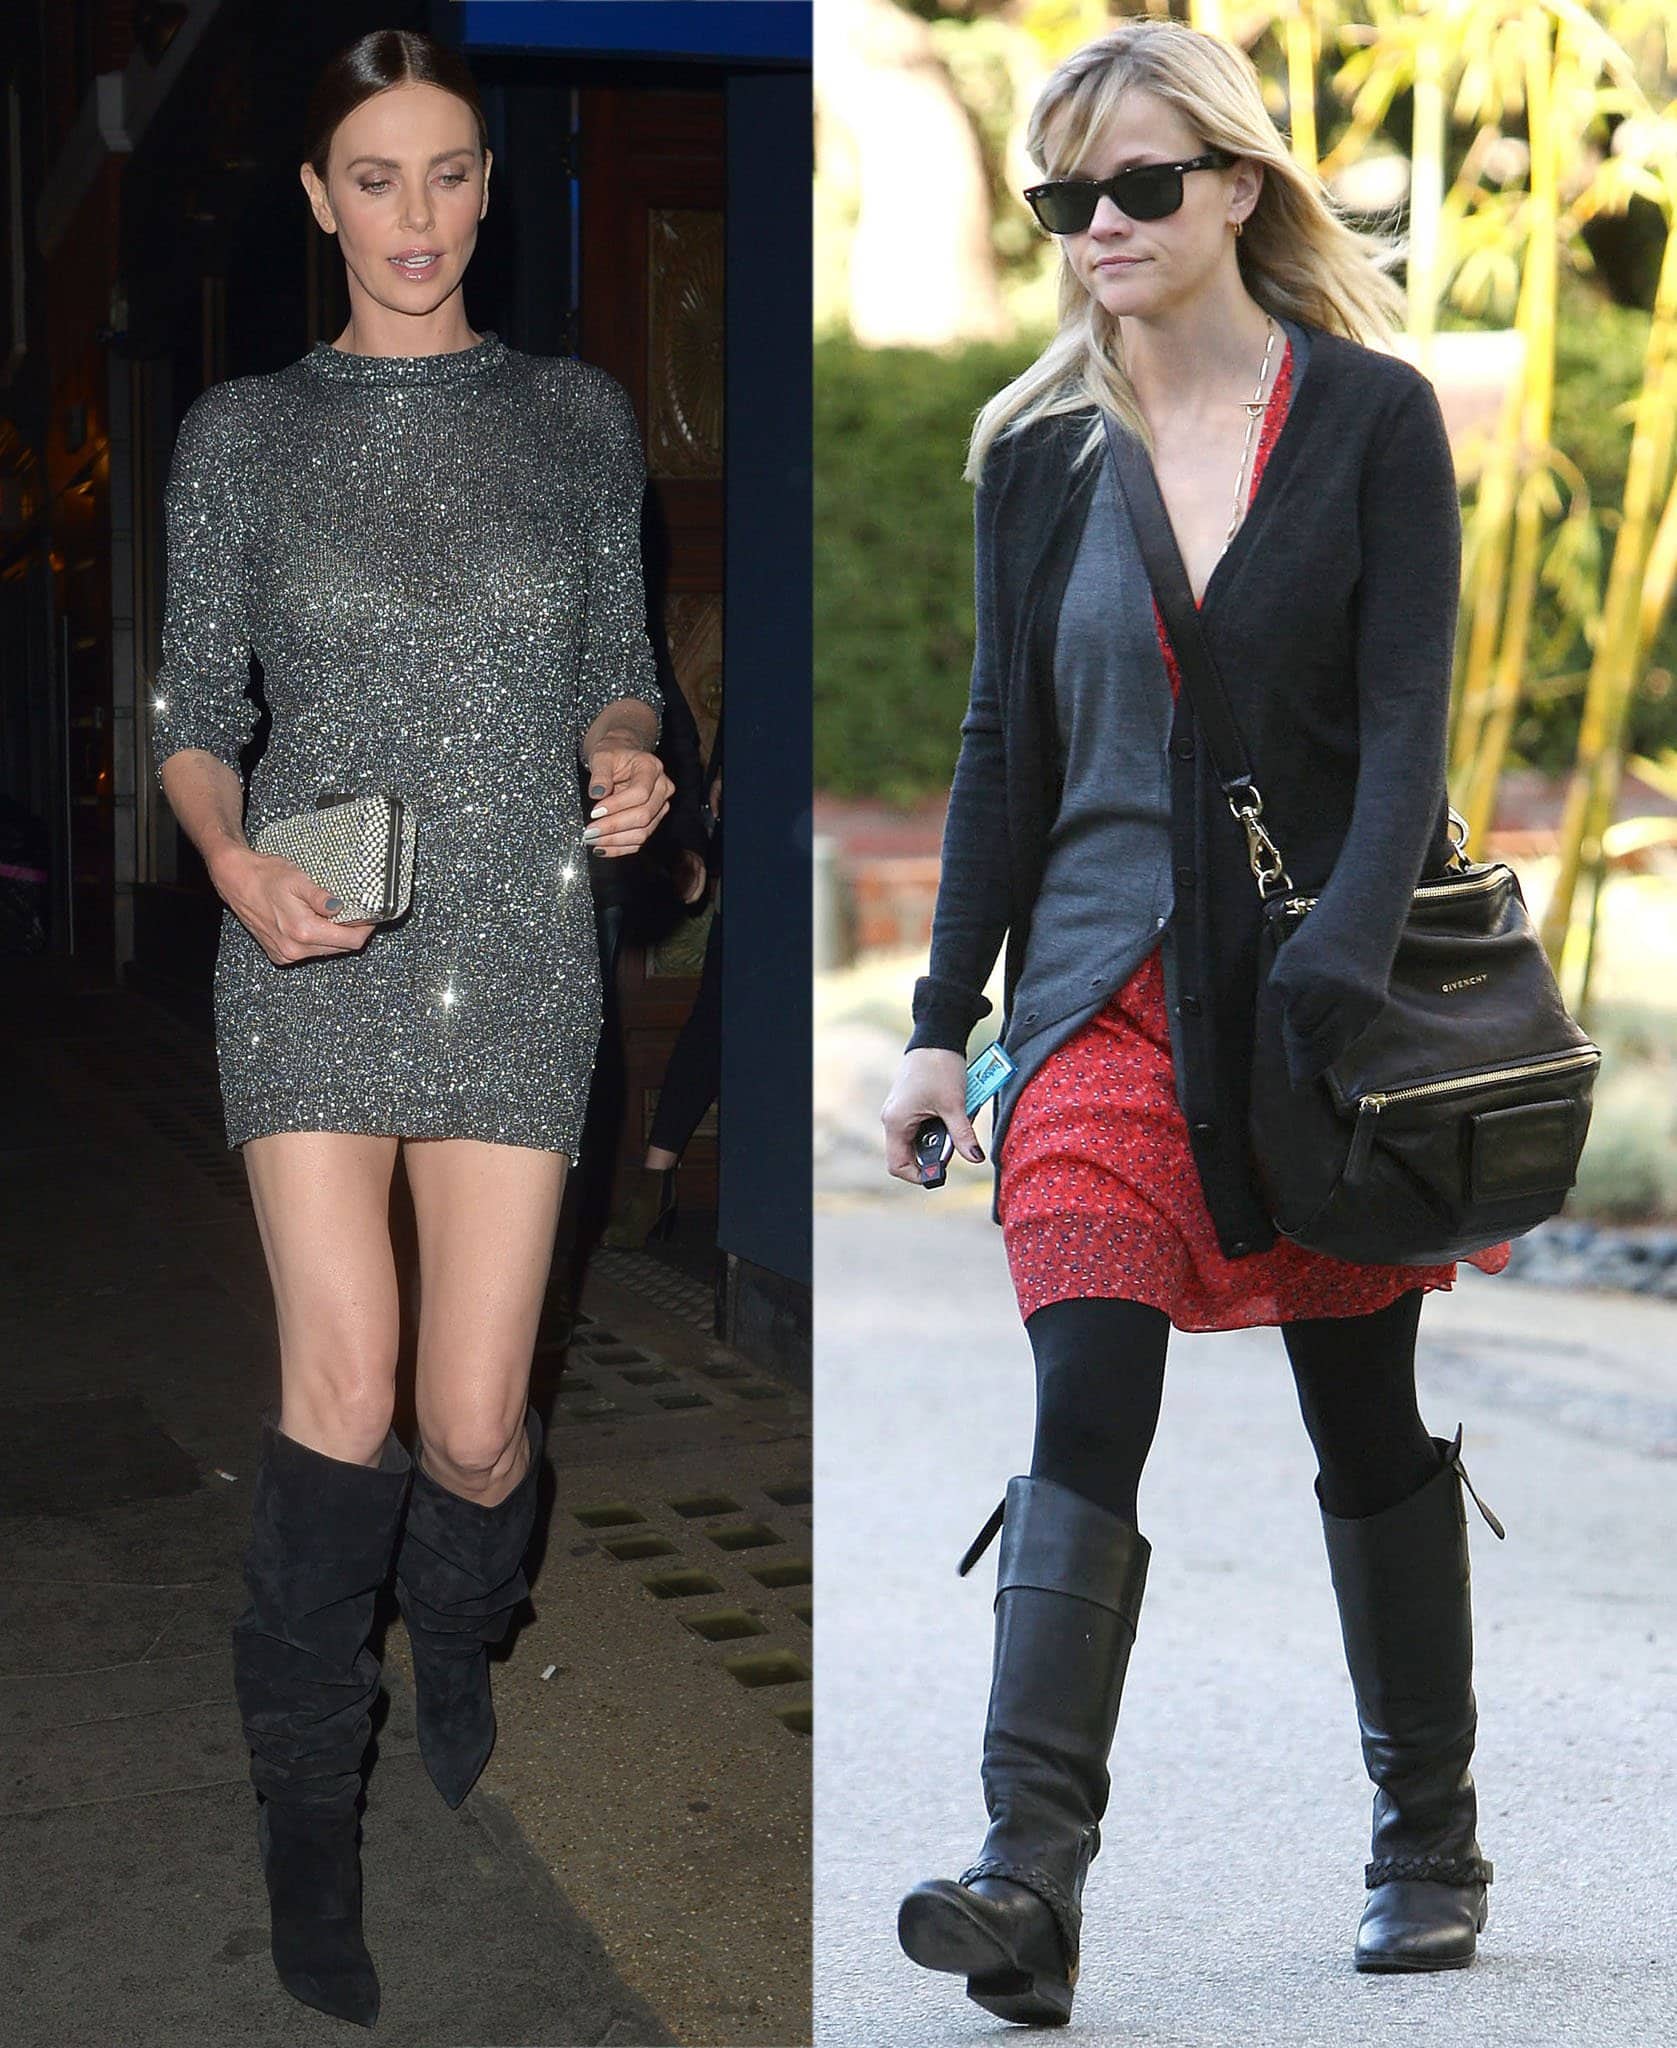 Charlize Theron dazzles with bare legs and knee-high boots paired with a glittering mini dress, contrasting Reese Witherspoon's cozy style featuring leggings and sleek knee-high boots